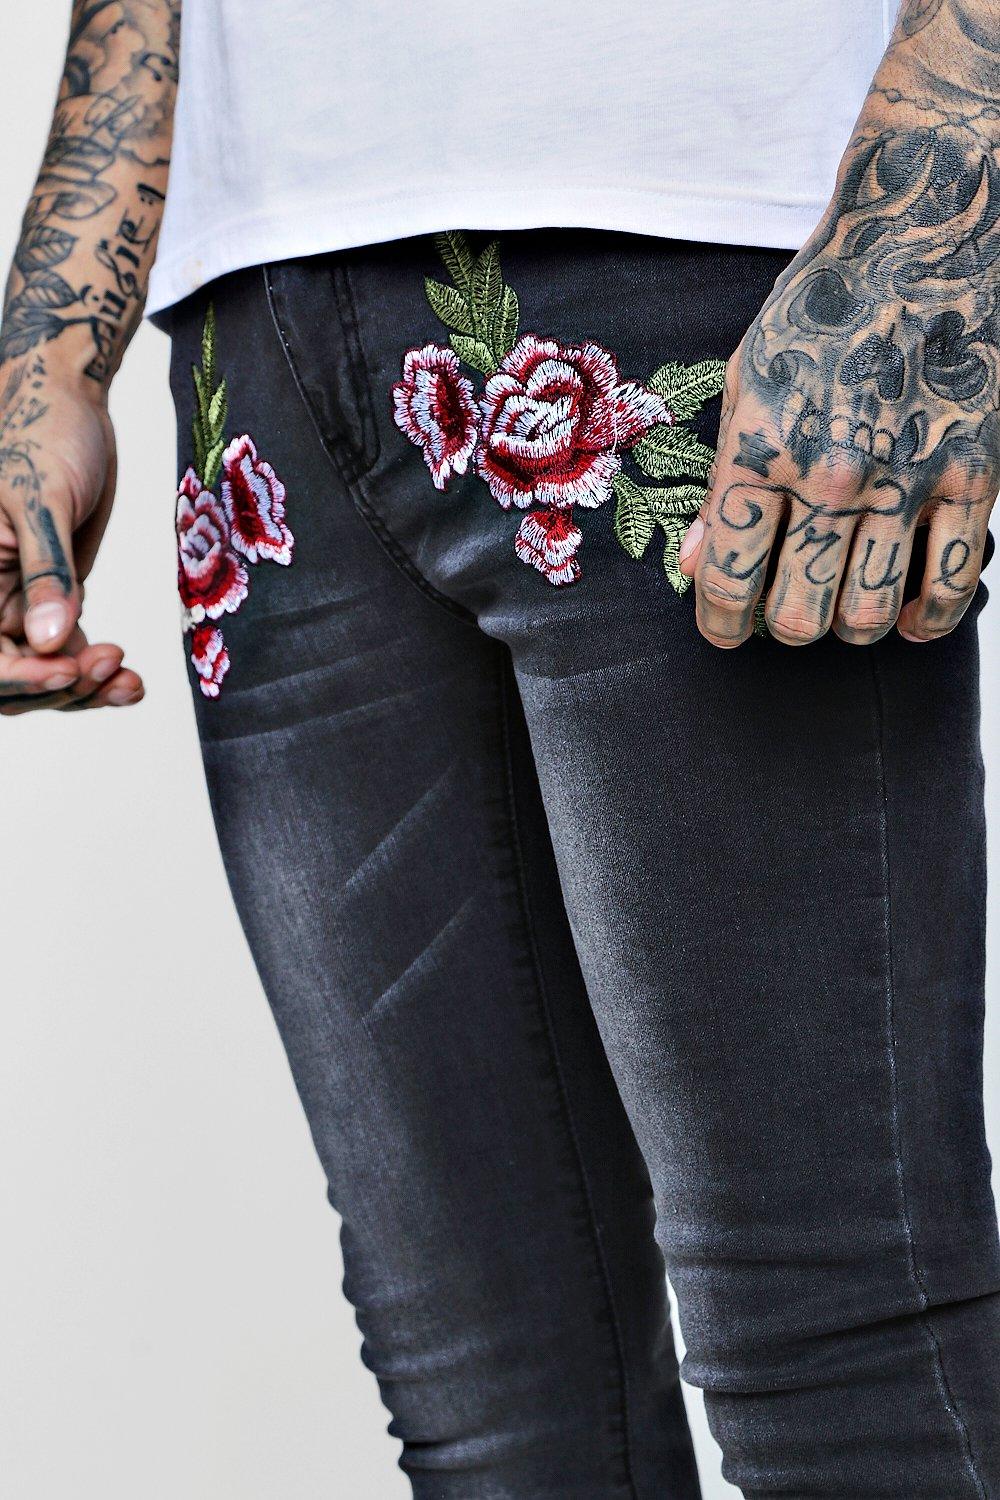 mens skinny jeans with roses